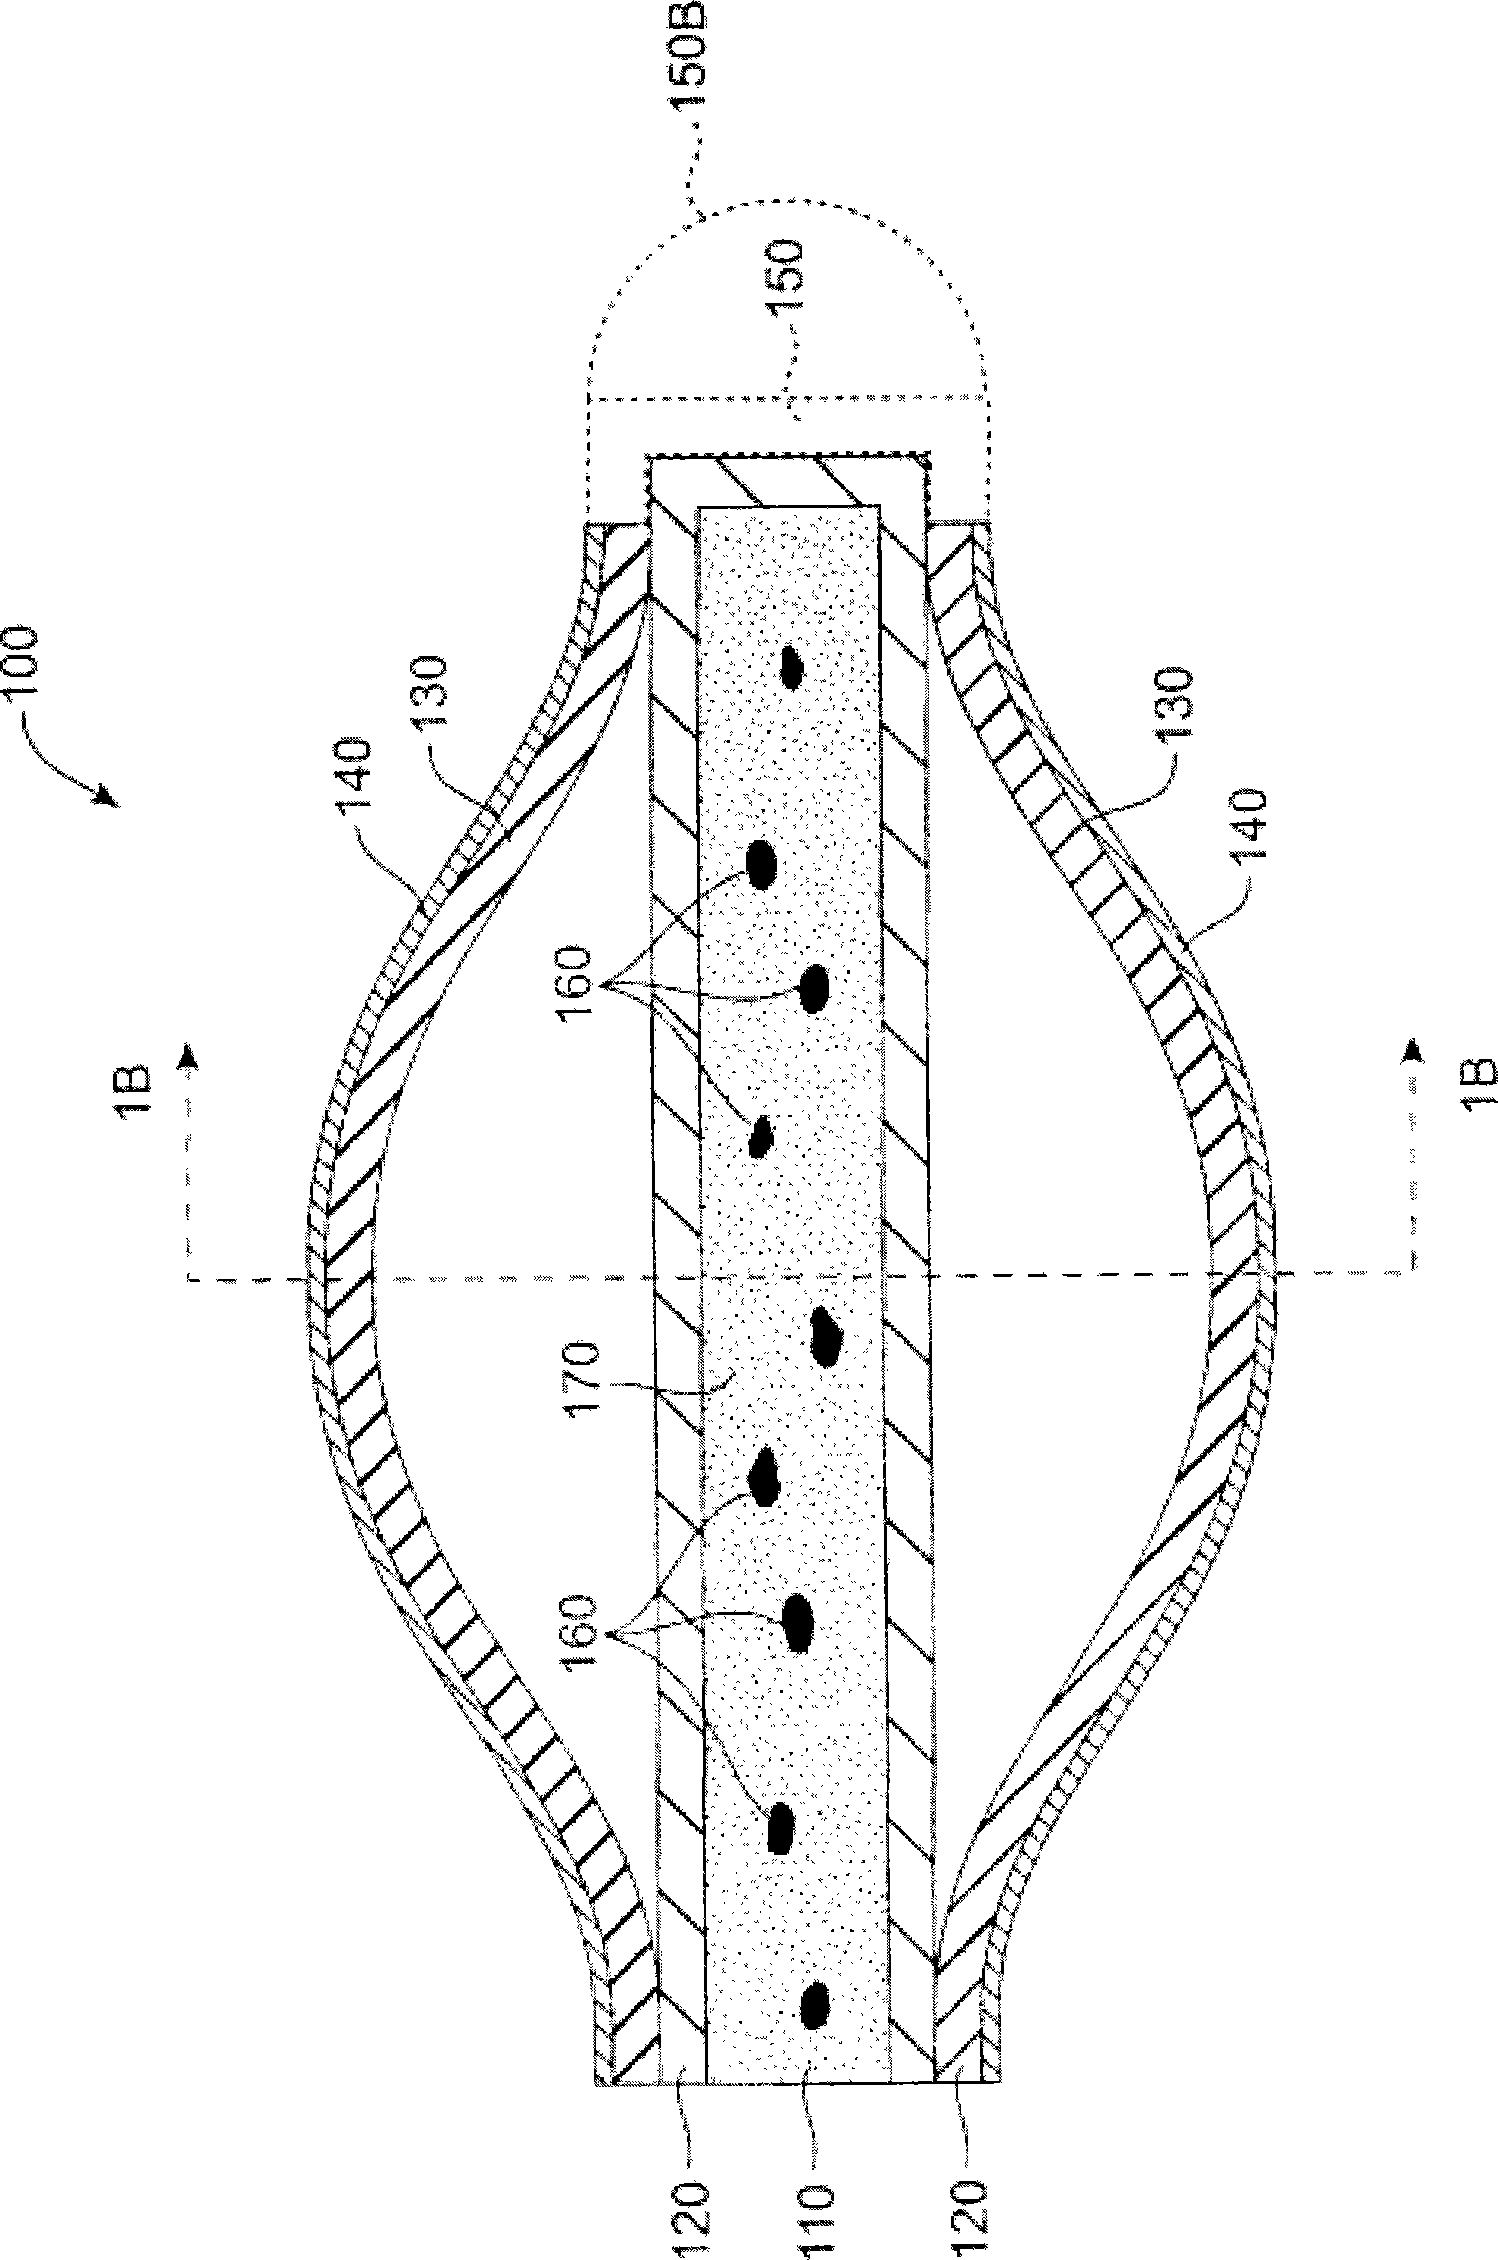 Drug delivery methods, structures, and compositions for nasolacrimal system